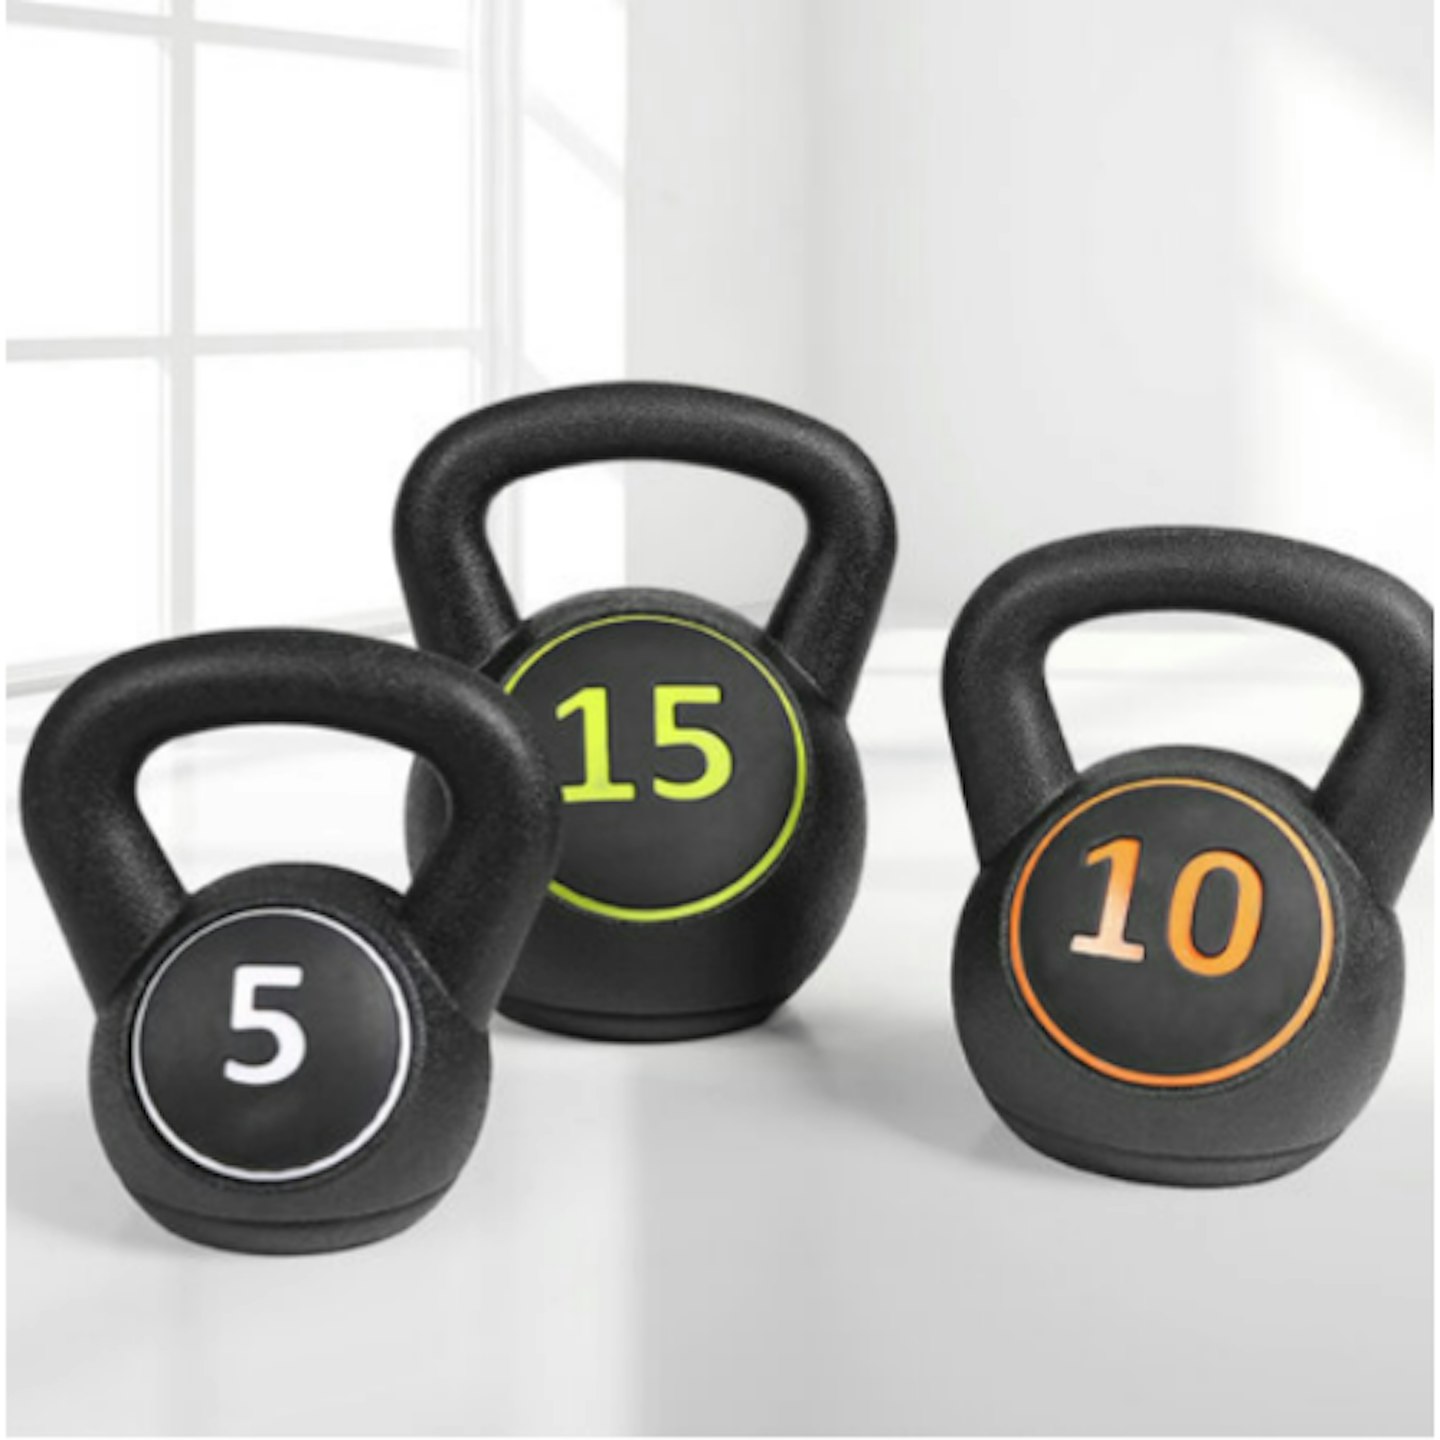 3pc Kettlebell Set - 5, 10, and 15lbs